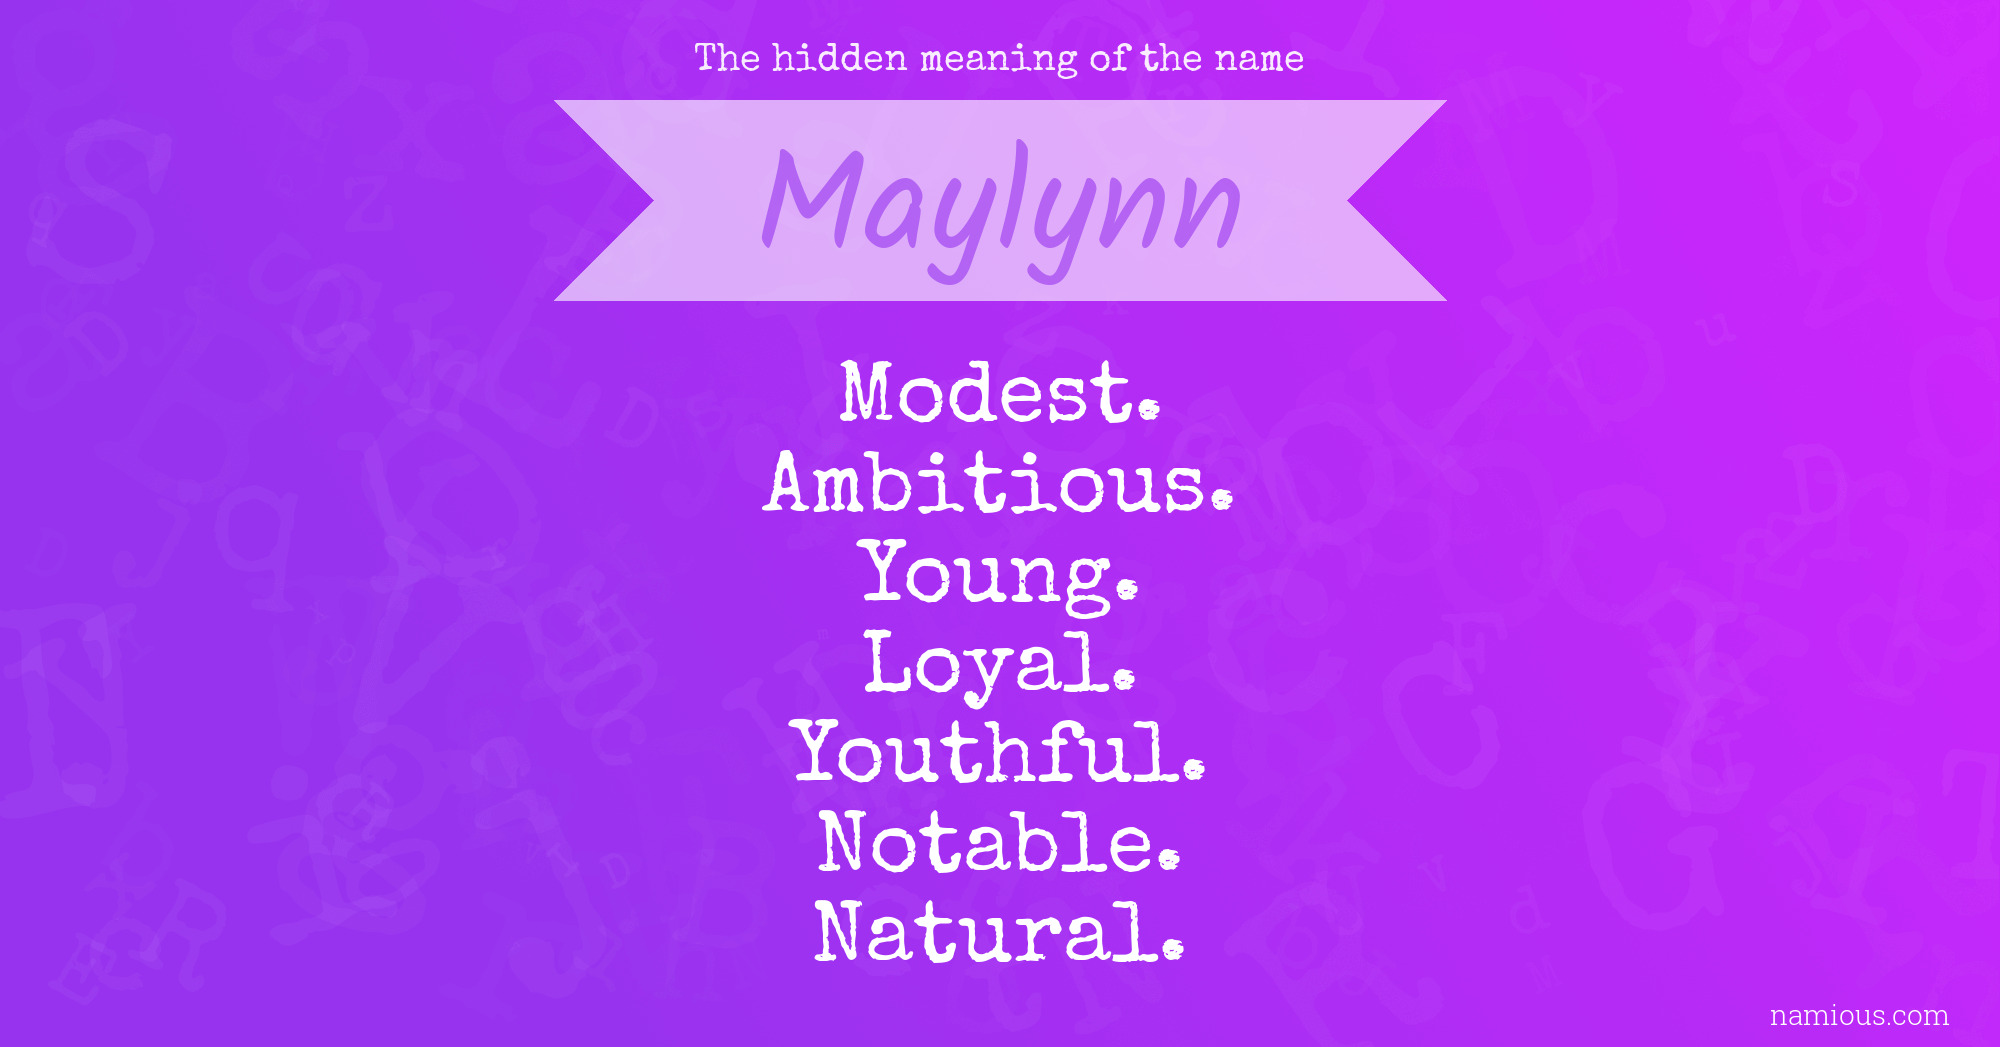 The hidden meaning of the name Maylynn